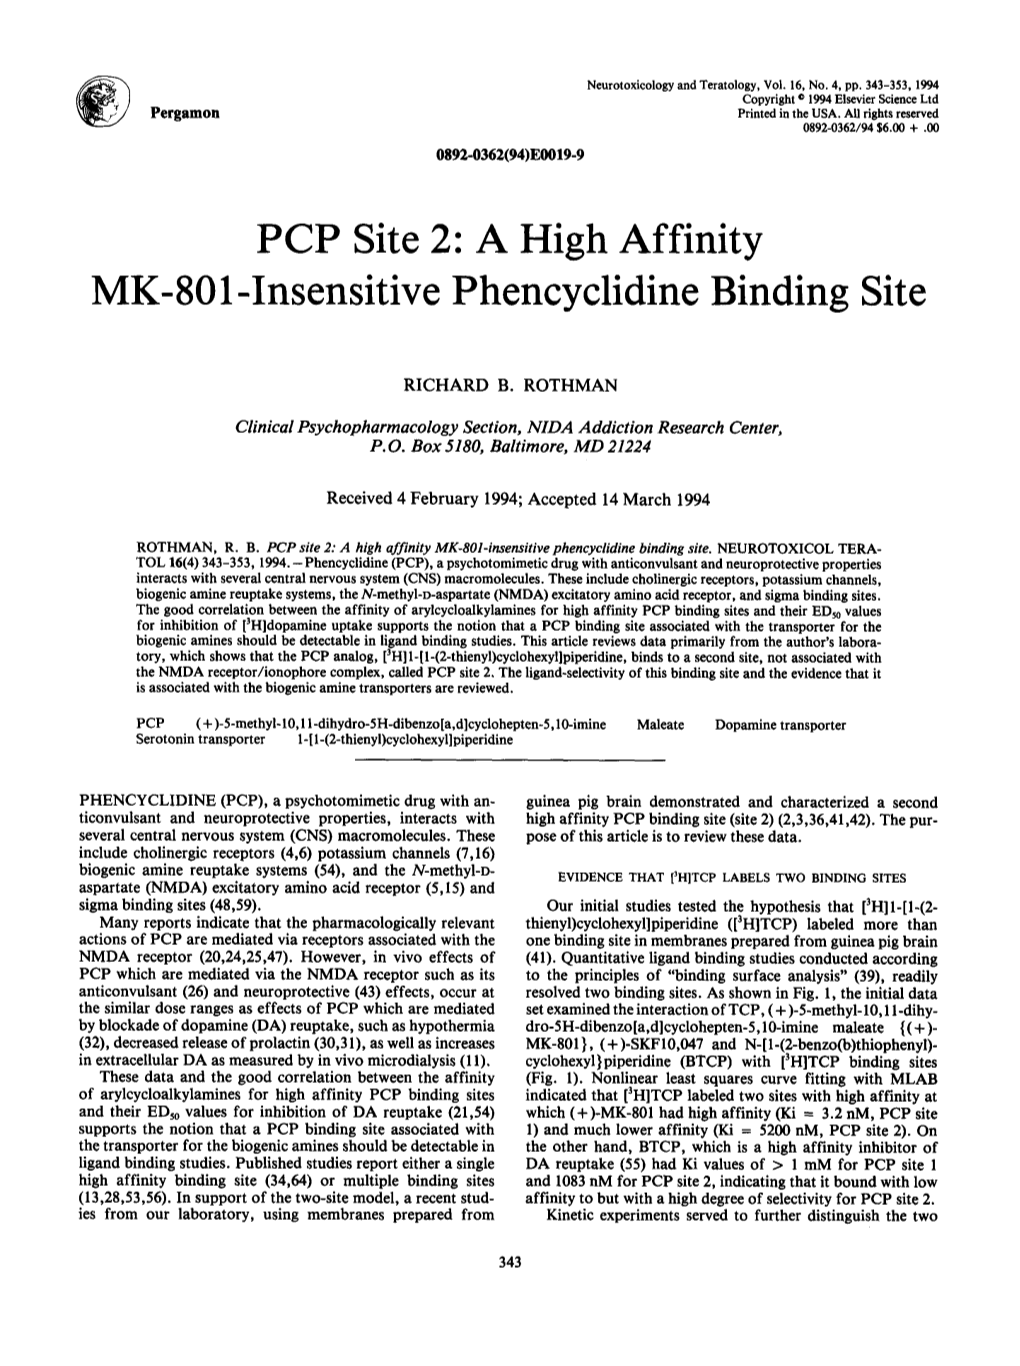 PCP Site 2: a High Affinity MK-801-Insensitive Phencyclidine Binding Site